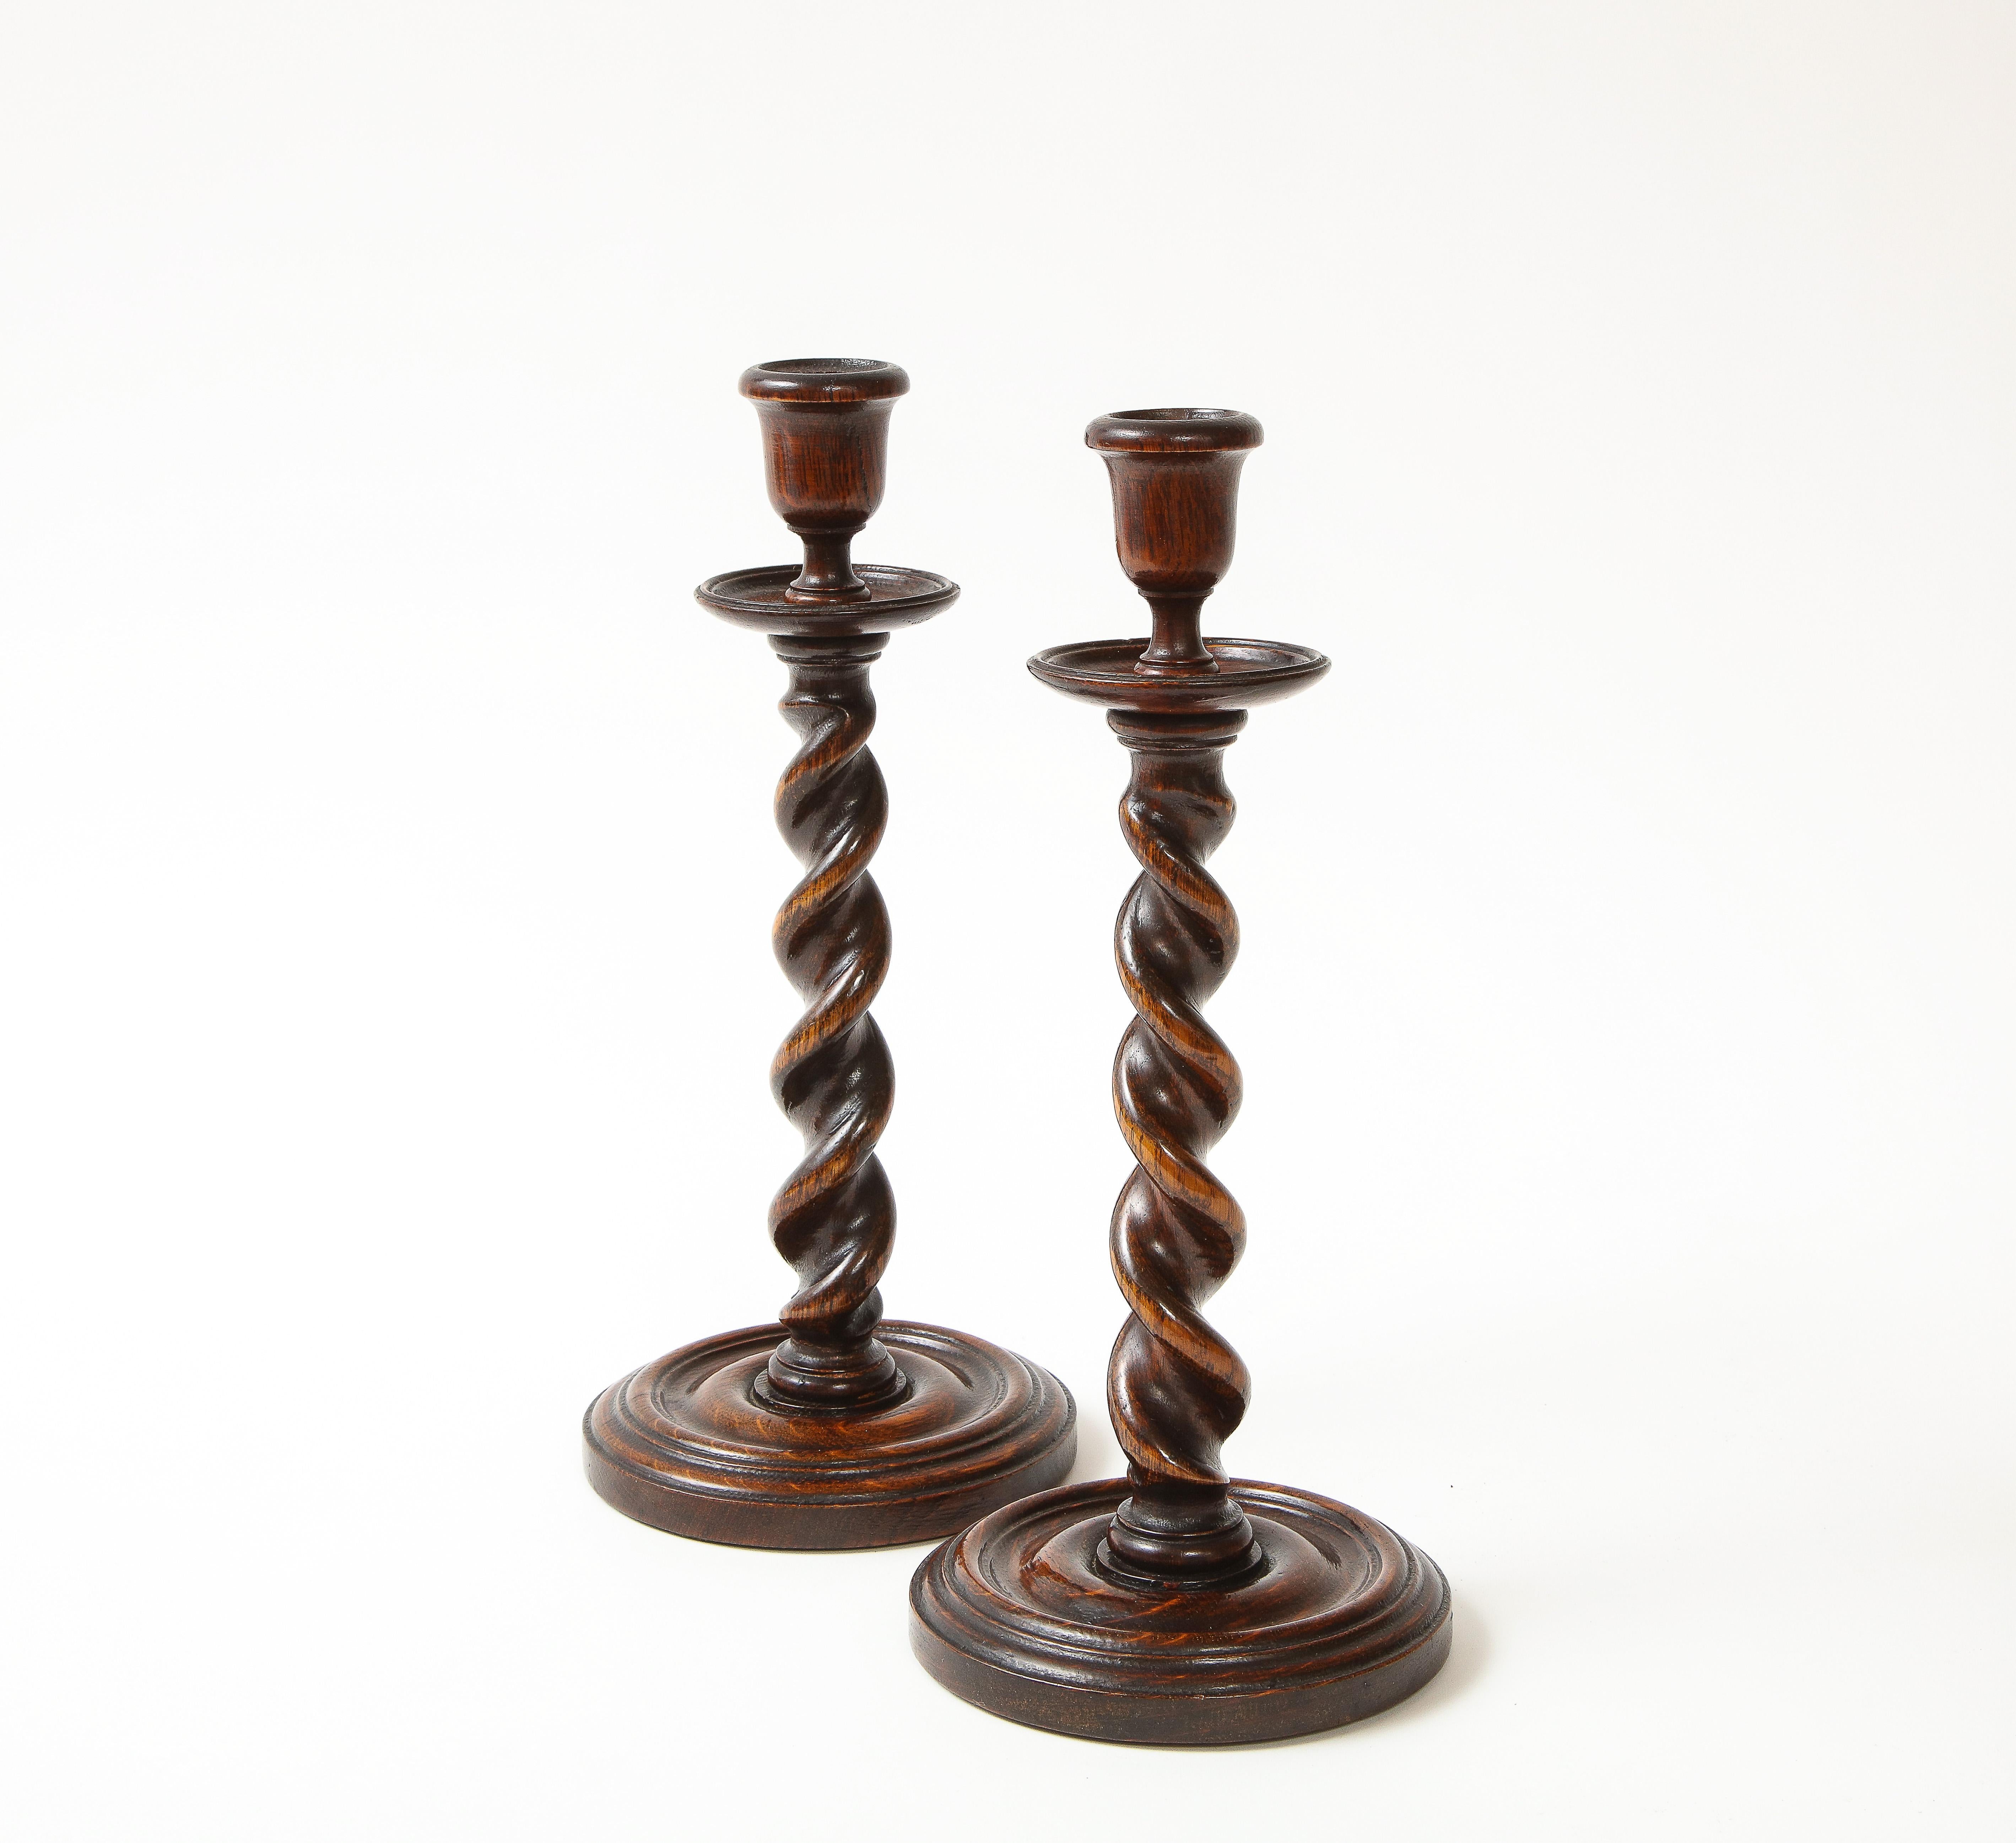 Carved of handsomely figured oak stained a rich deep brown; with spiral-fluted supports on turned round bases.